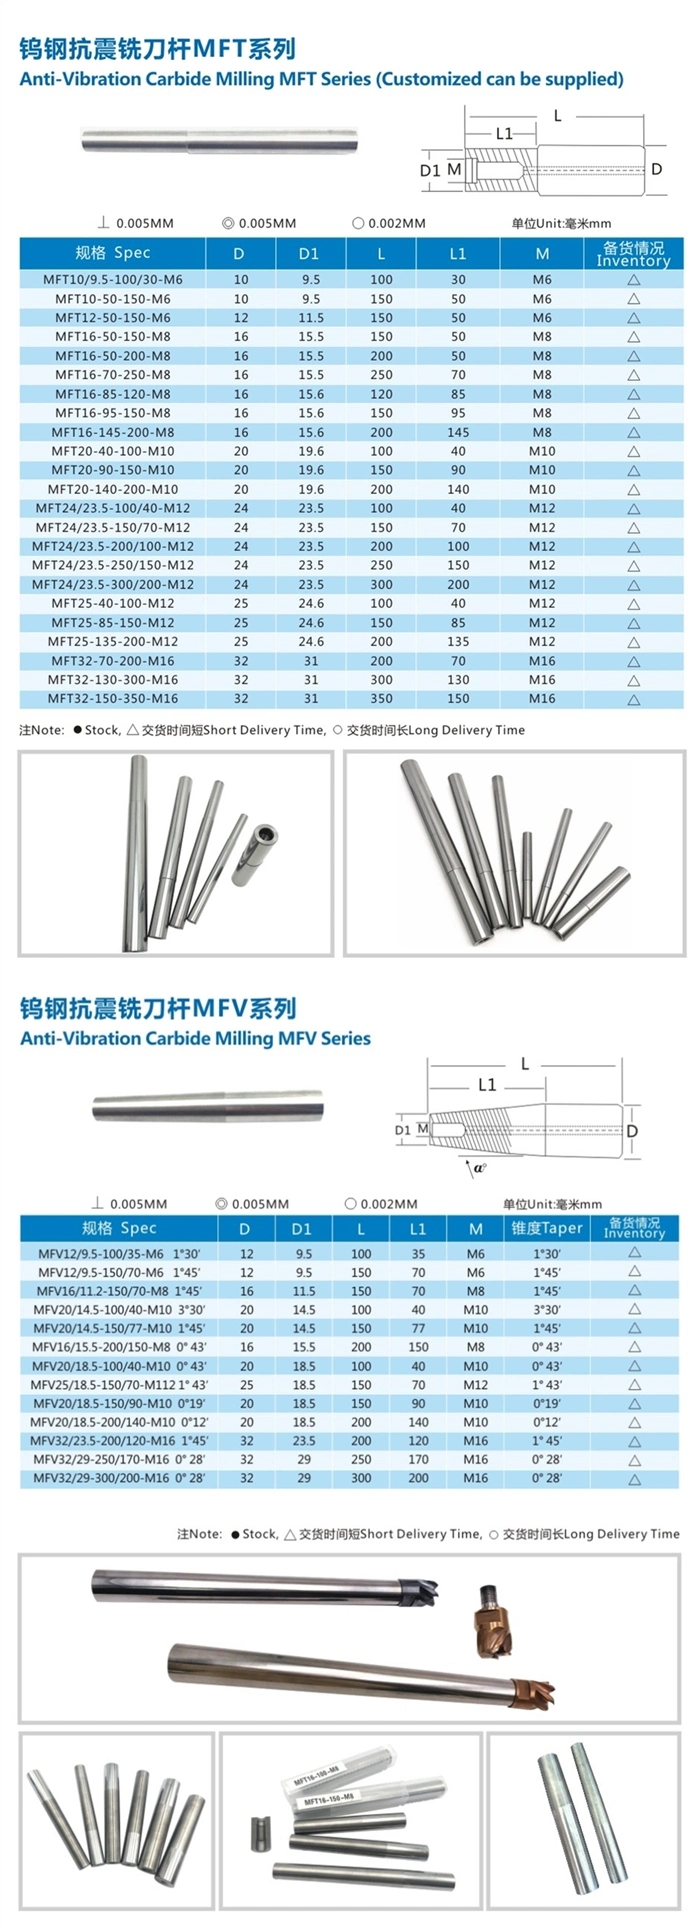 World Class Mitsubishi Chatter Resistant Boring Bars Dimple Bar with Highly Rigid and Light Weight Head